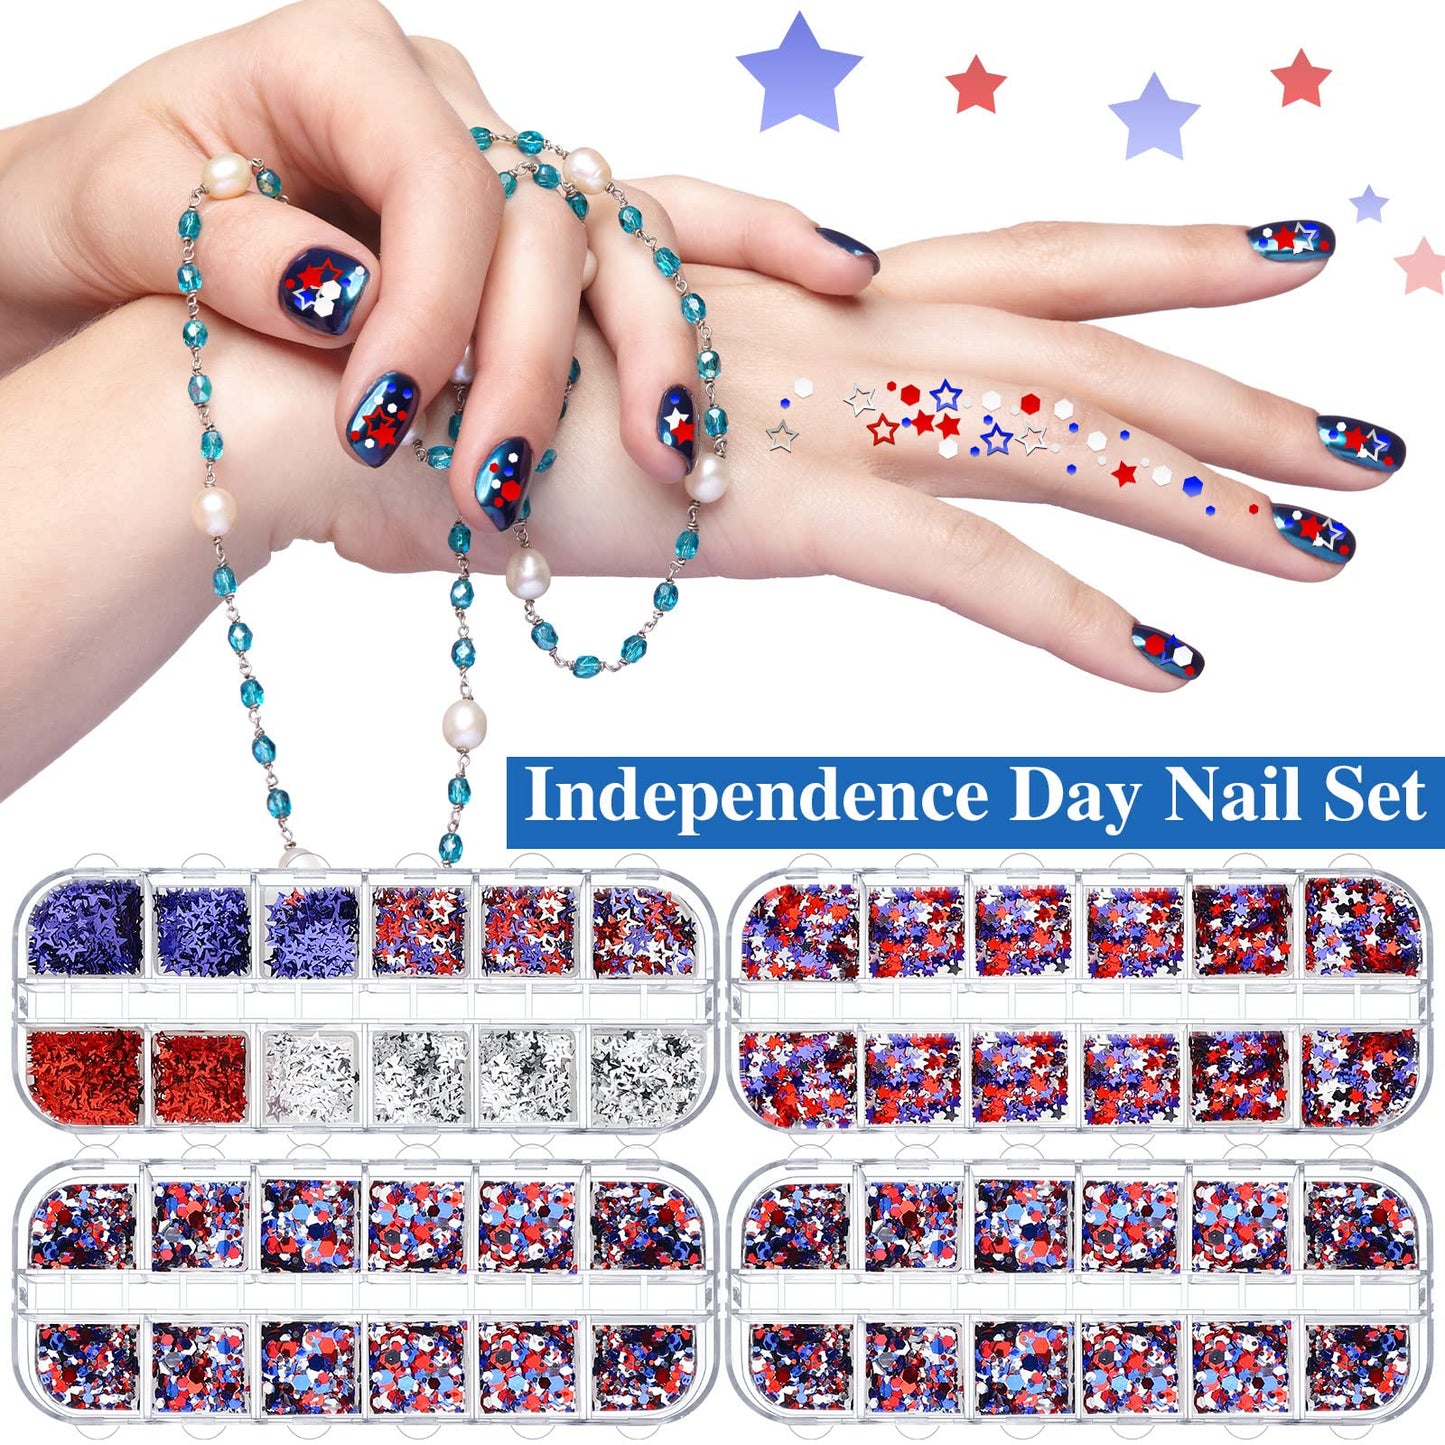 72 Set 4th of July Day Nail Charm 12 Pieces 3D Patriotic Star Nail Glitter Charm 48 Grids Memorial Day Star Nail Sequins 12 Sheet Nail Independence Day Sticker with Nail Brushes Gems for Women